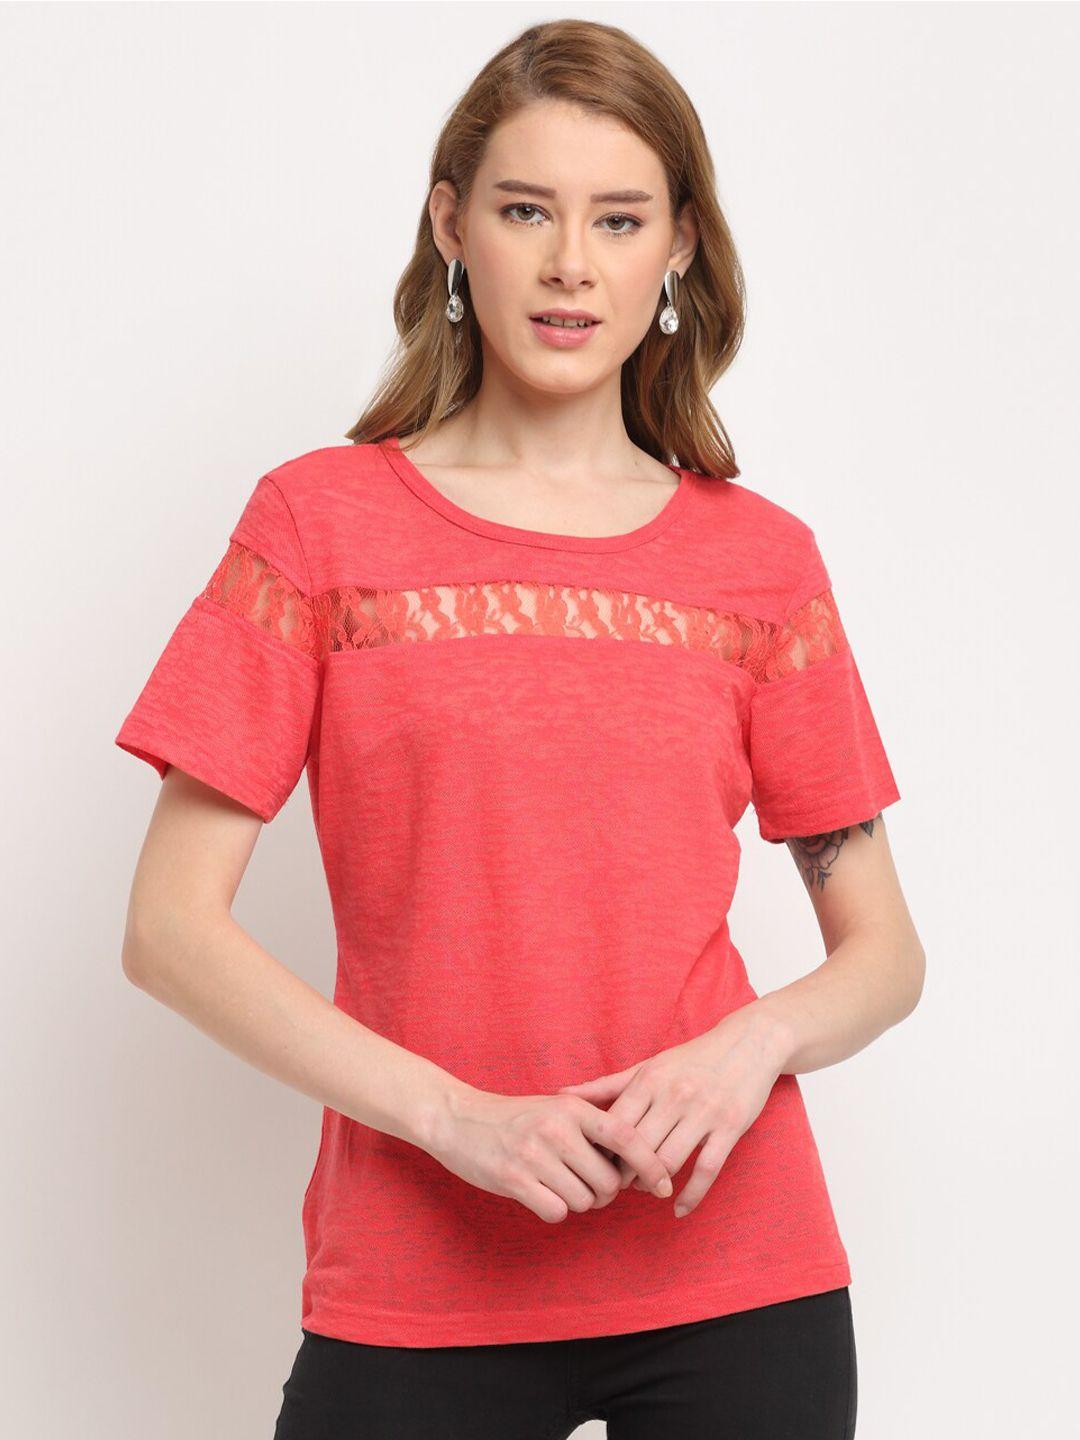 crozo by cantabil coral regular top